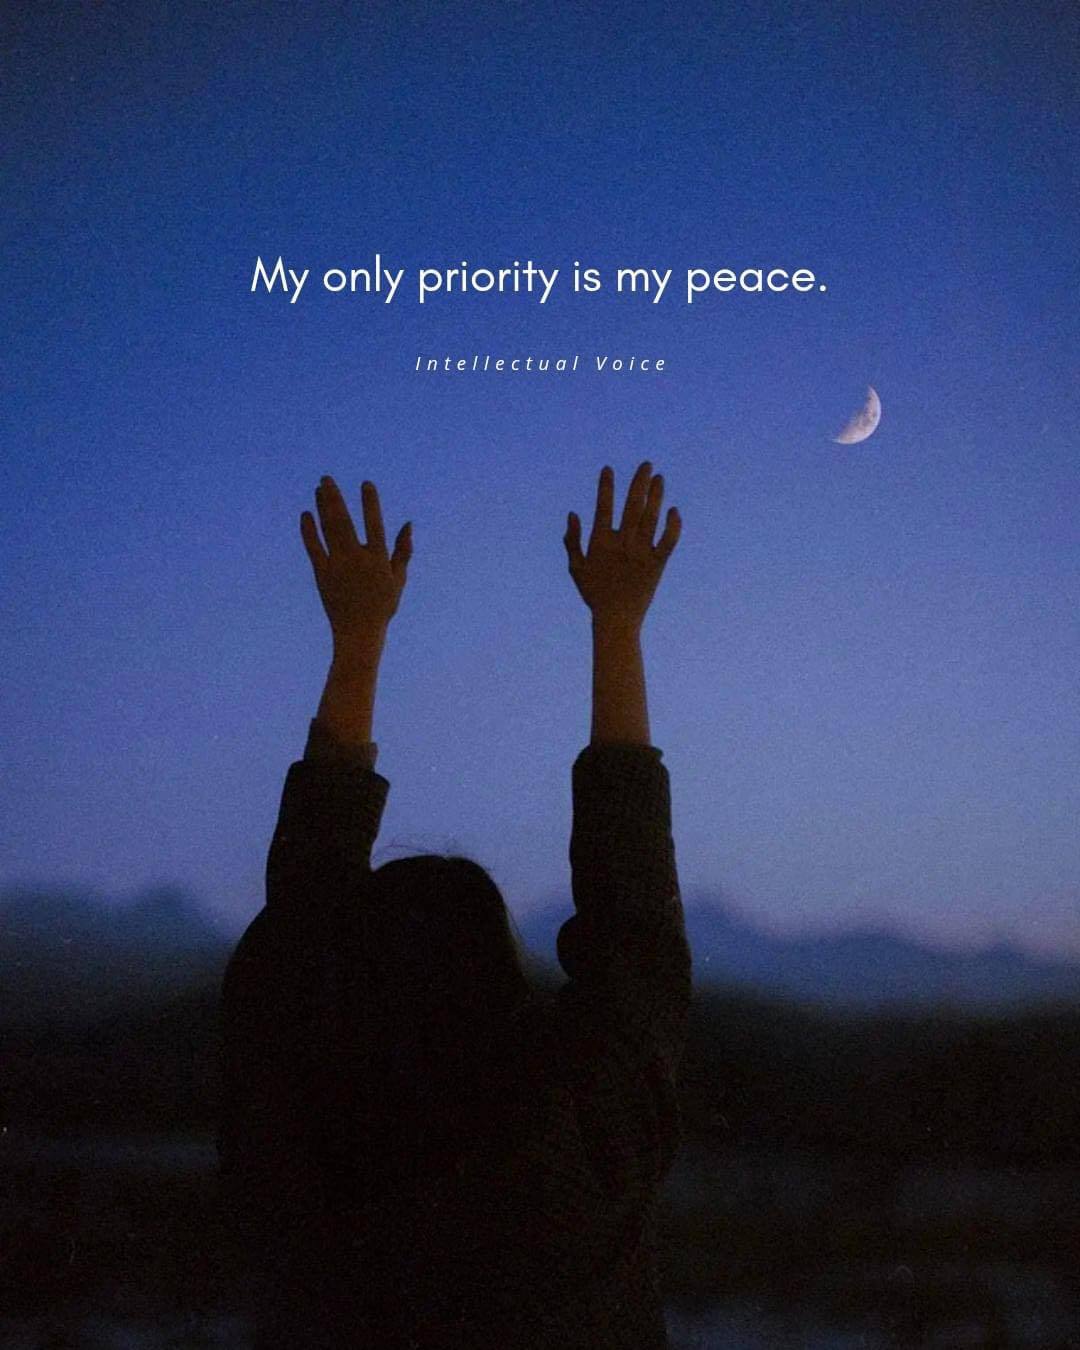 Quotes 'nd Notes - My only priority is my peace. via Intellectual...